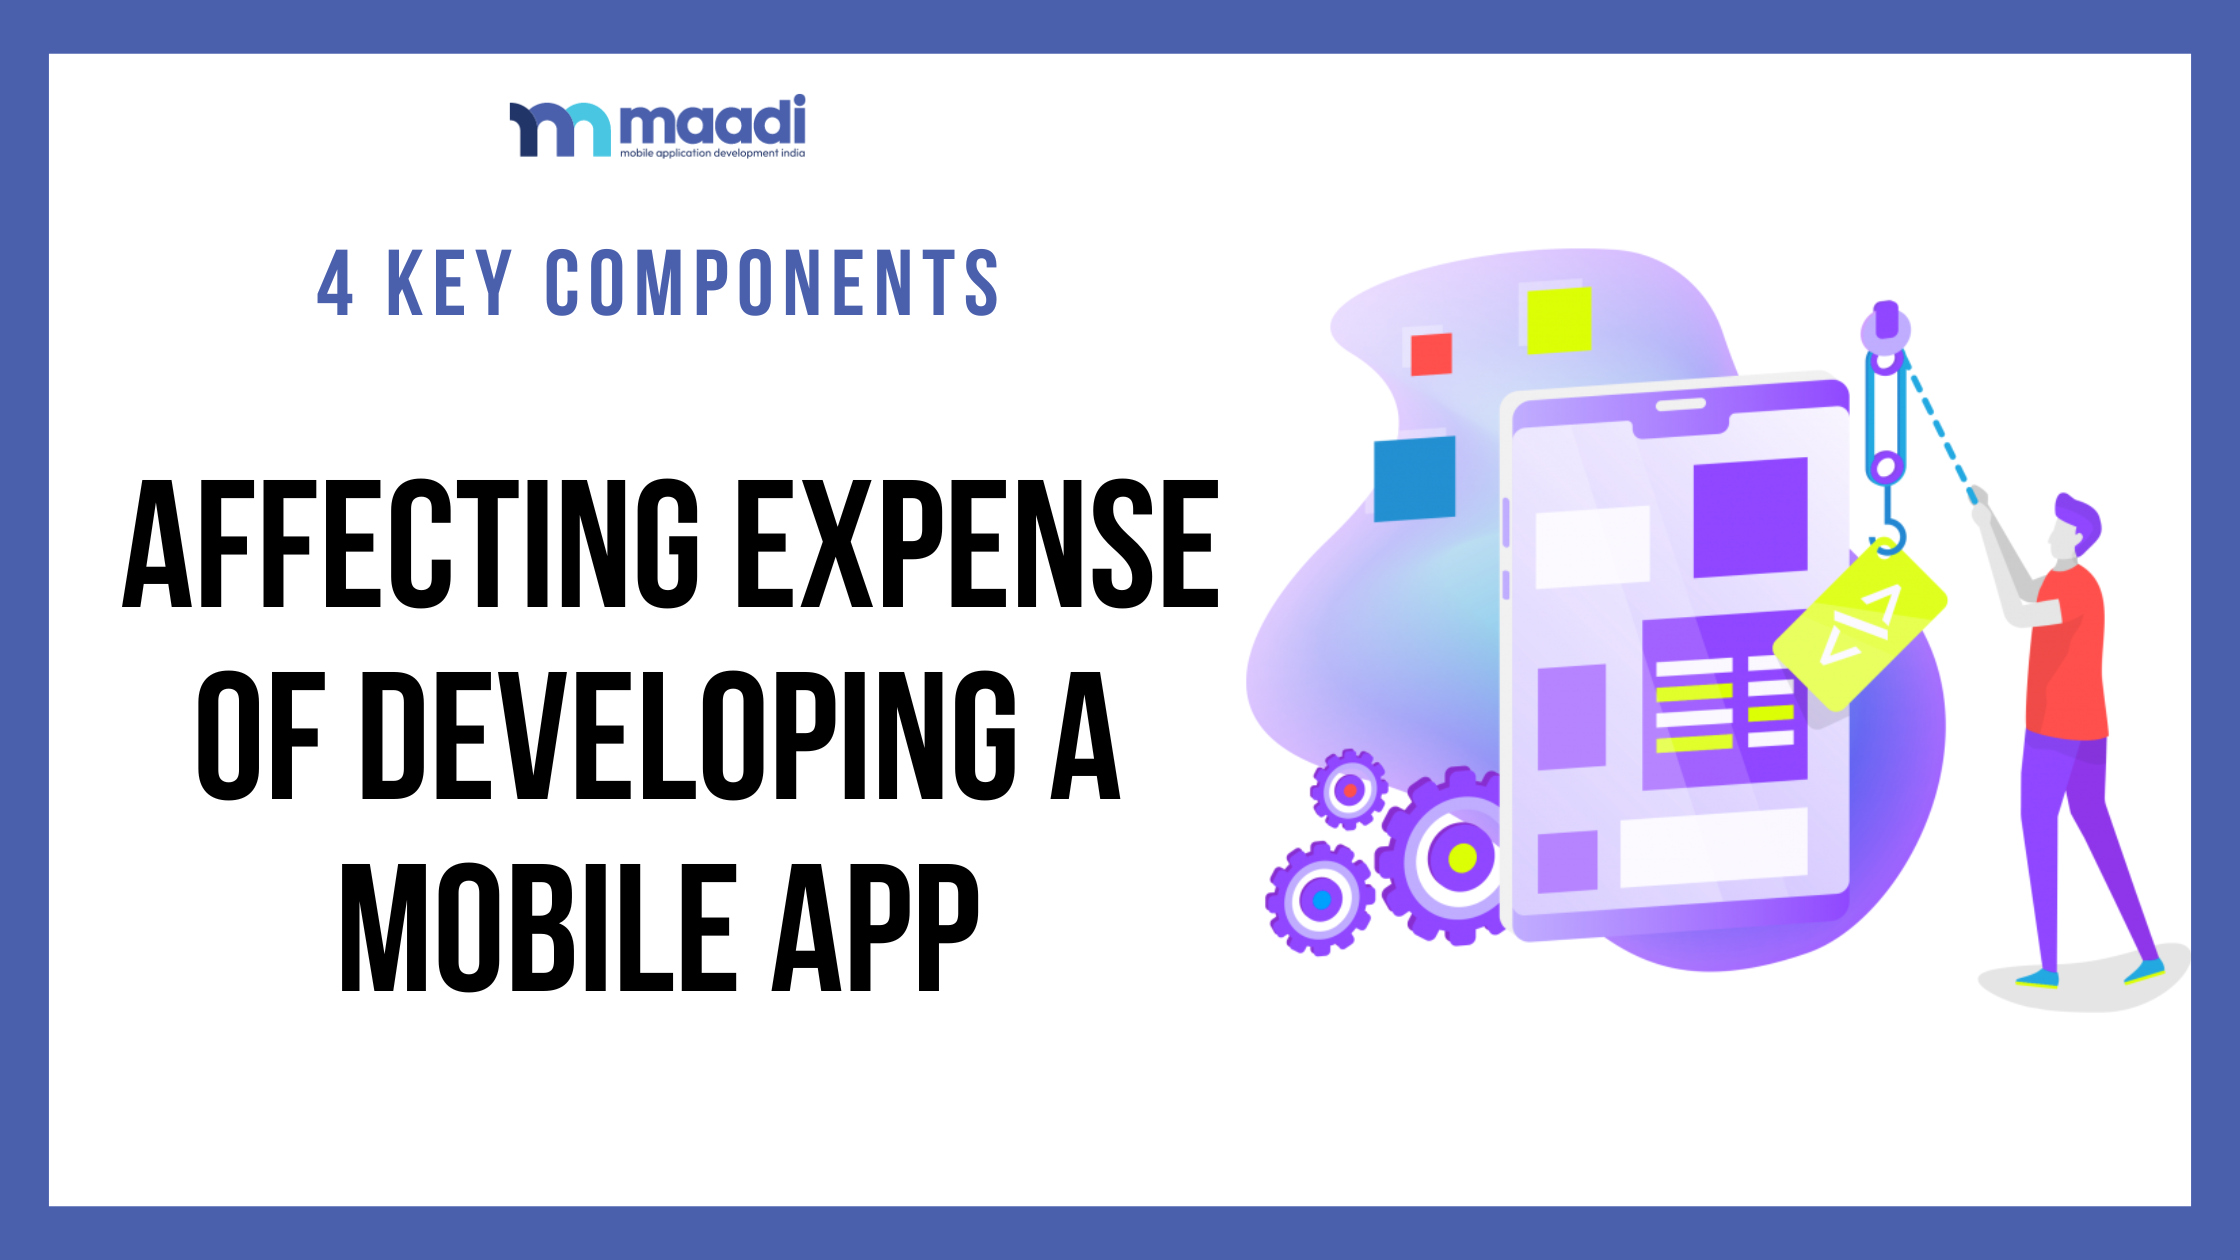 4 Key Components Affecting Expense of Developing a Mobile App